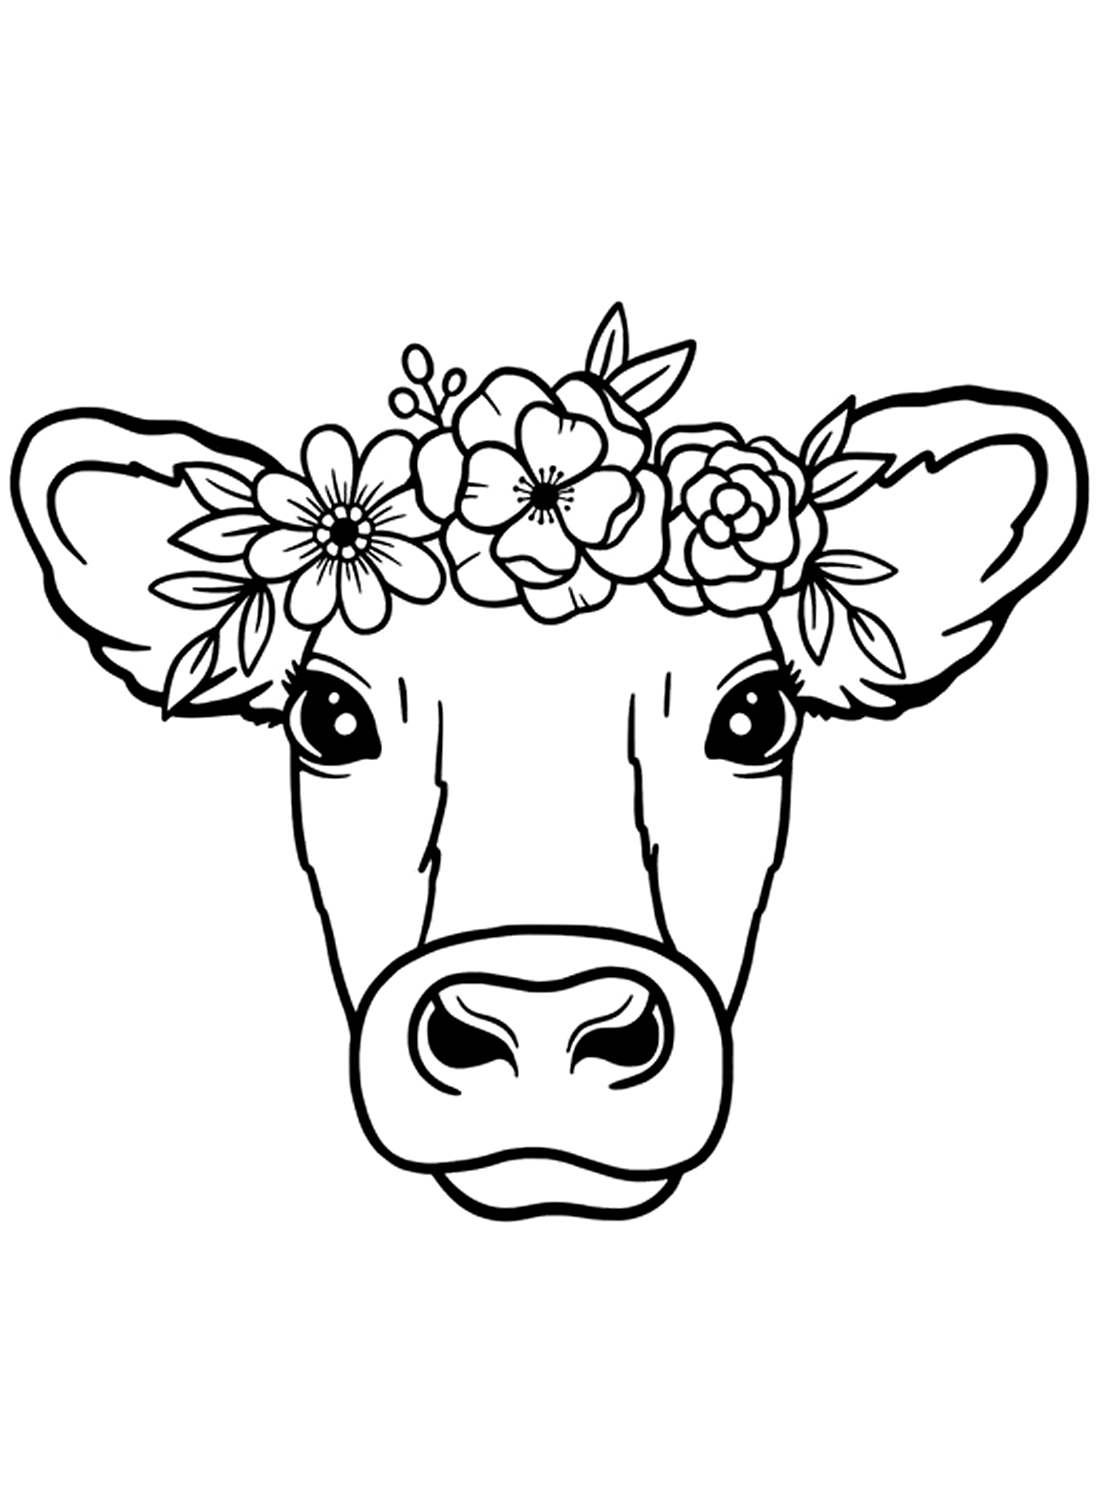 A Head of Cow Picture